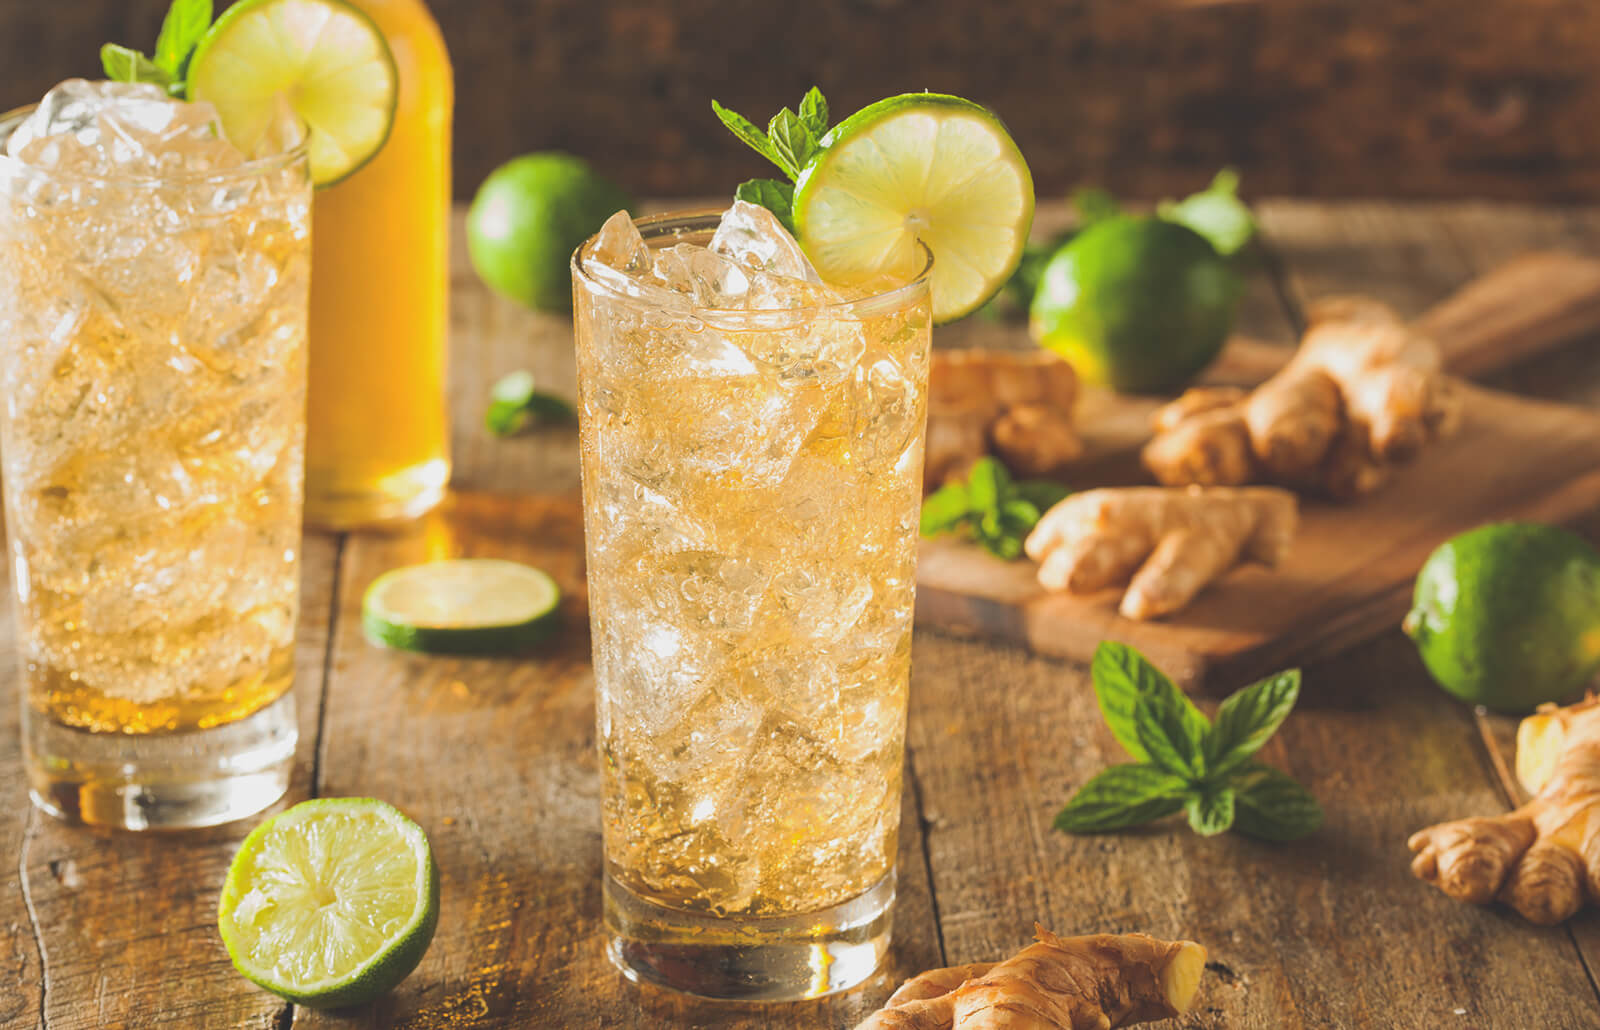 What Alcohol Goes with Ginger Beer